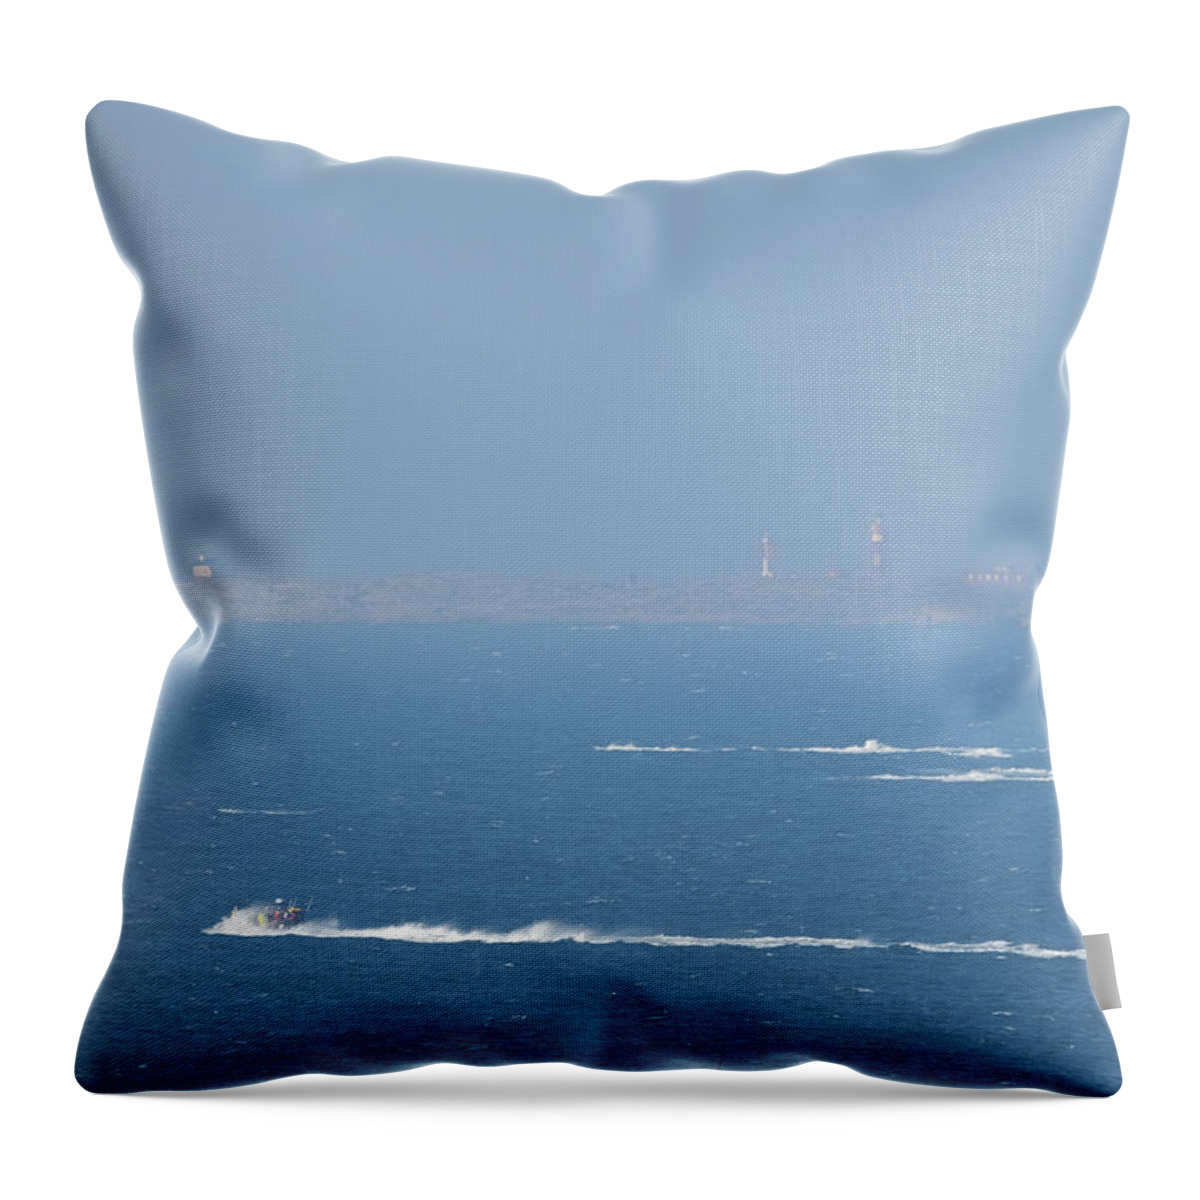 Sweden Throw Pillow featuring the pyrography The Coast Guard's RIB by Magnus Haellquist